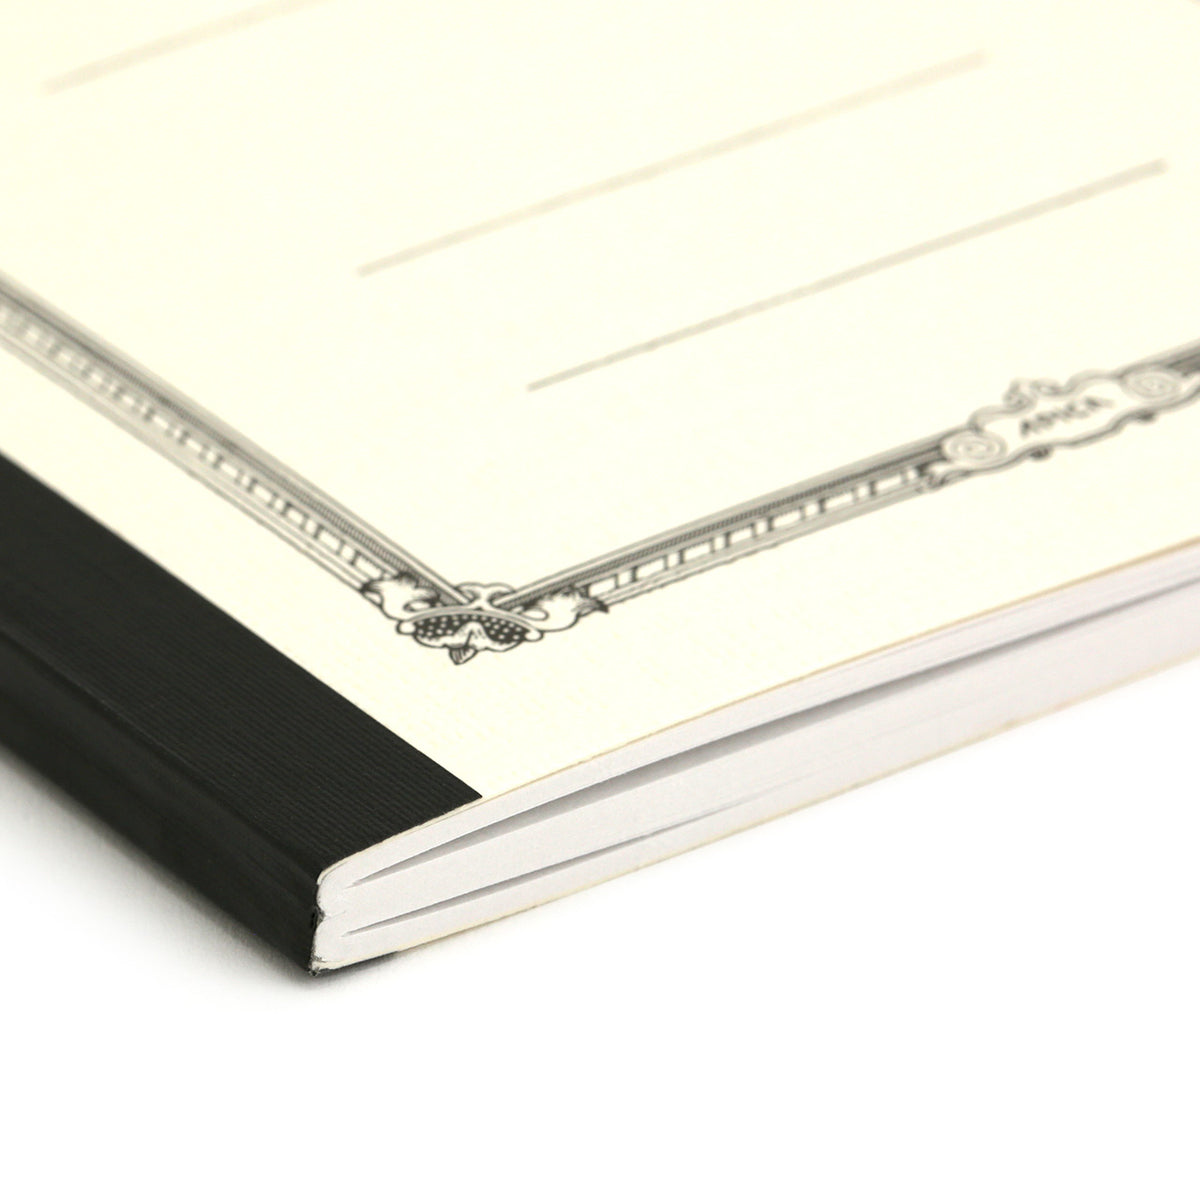 end view of the white notebook showing the sections and binding